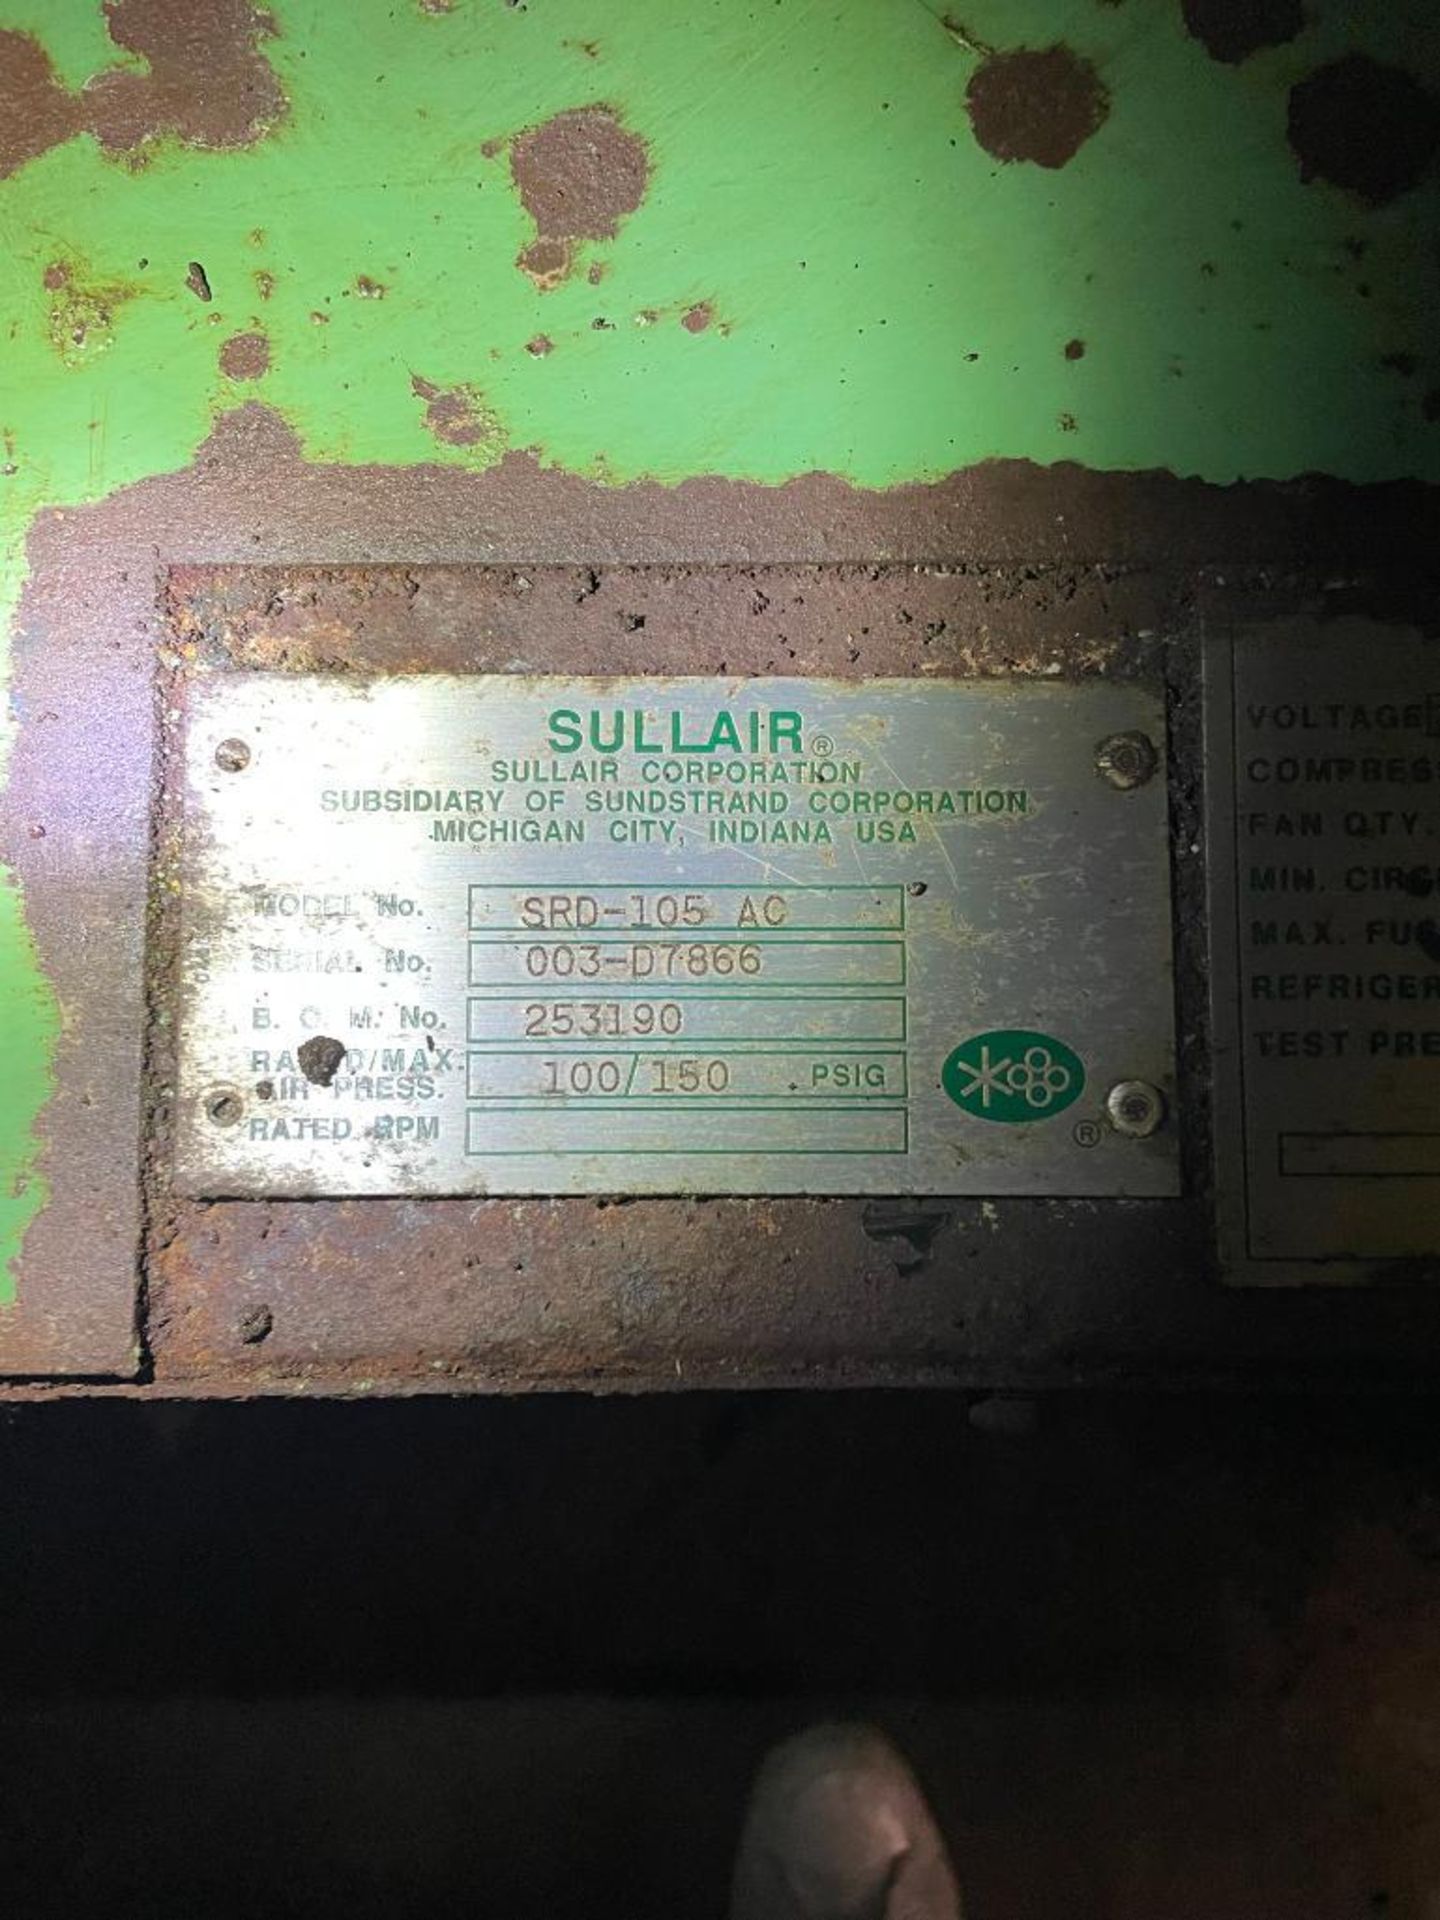 SULLAIR SRD-105 AC REFRIGERATED DRYER BRAND/MODEL: SULLAIR SRD-105-AC LOCATION BASEMENT QTY: 1 - Image 2 of 3